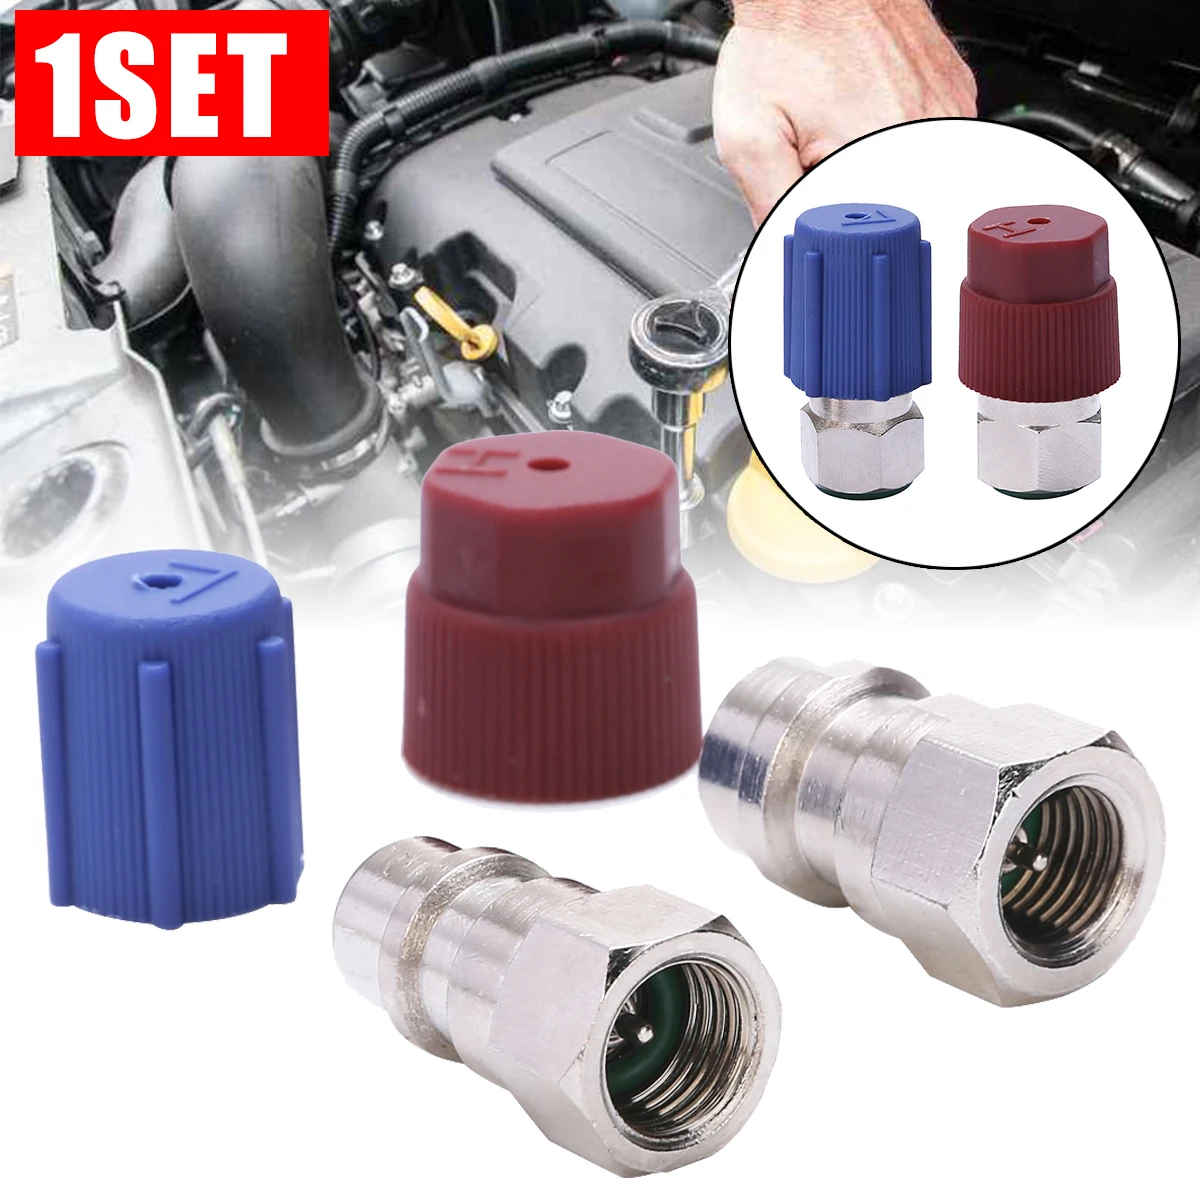 2pcs Red Blue Car Retrofit Conversion Adapter 1/4 SAE R12 To R134a High/Low Voltage AC Fitting For Automobiles Air Conditioner